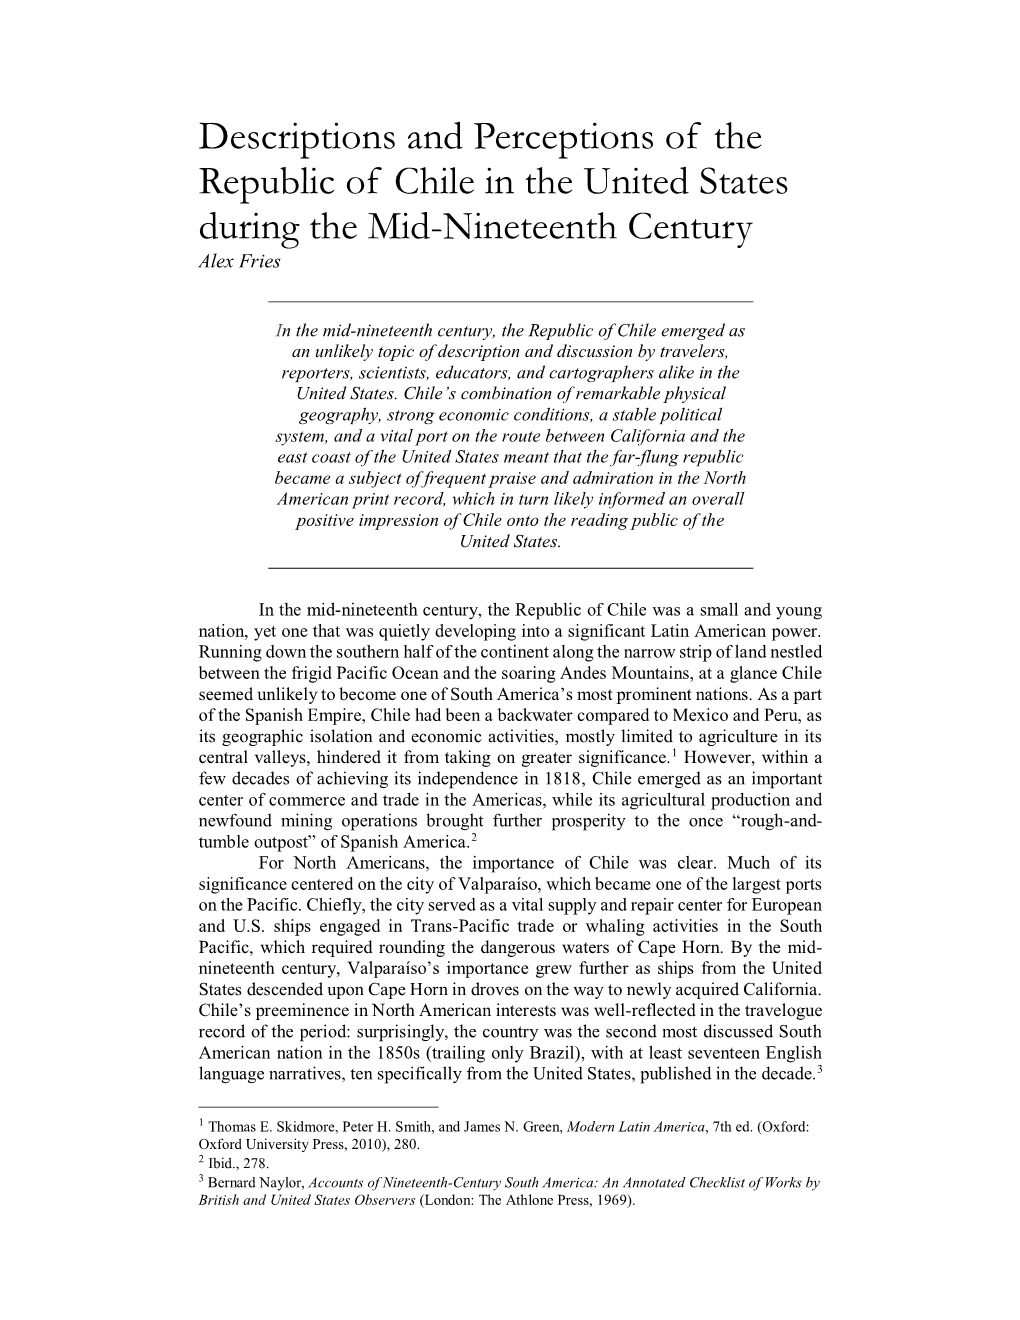 Descriptions and Perceptions of the Republic of Chile in the United States During the Mid-Nineteenth Century Alex Fries